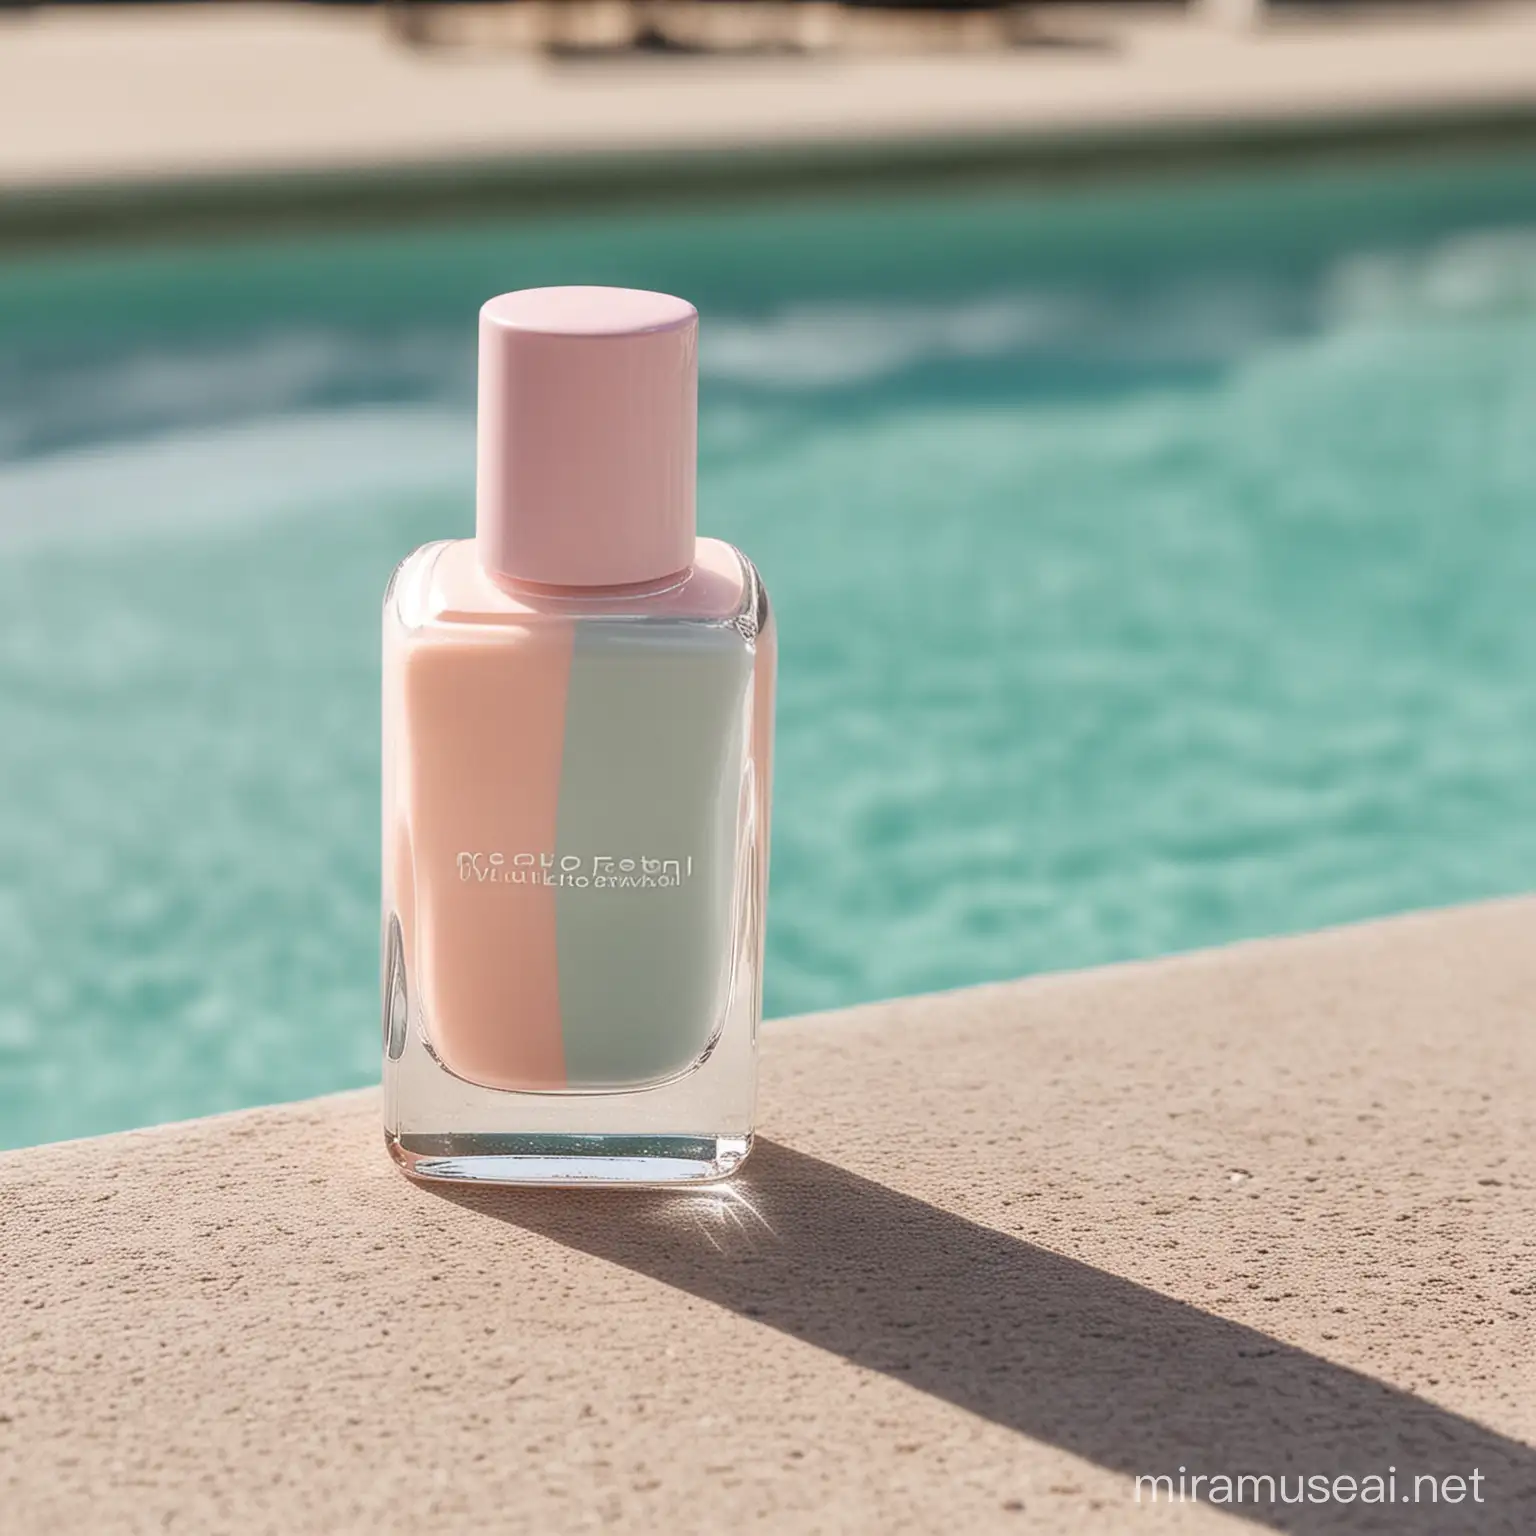 Poolside Relaxation with Vibrant Pastel Nail Polish Bottle